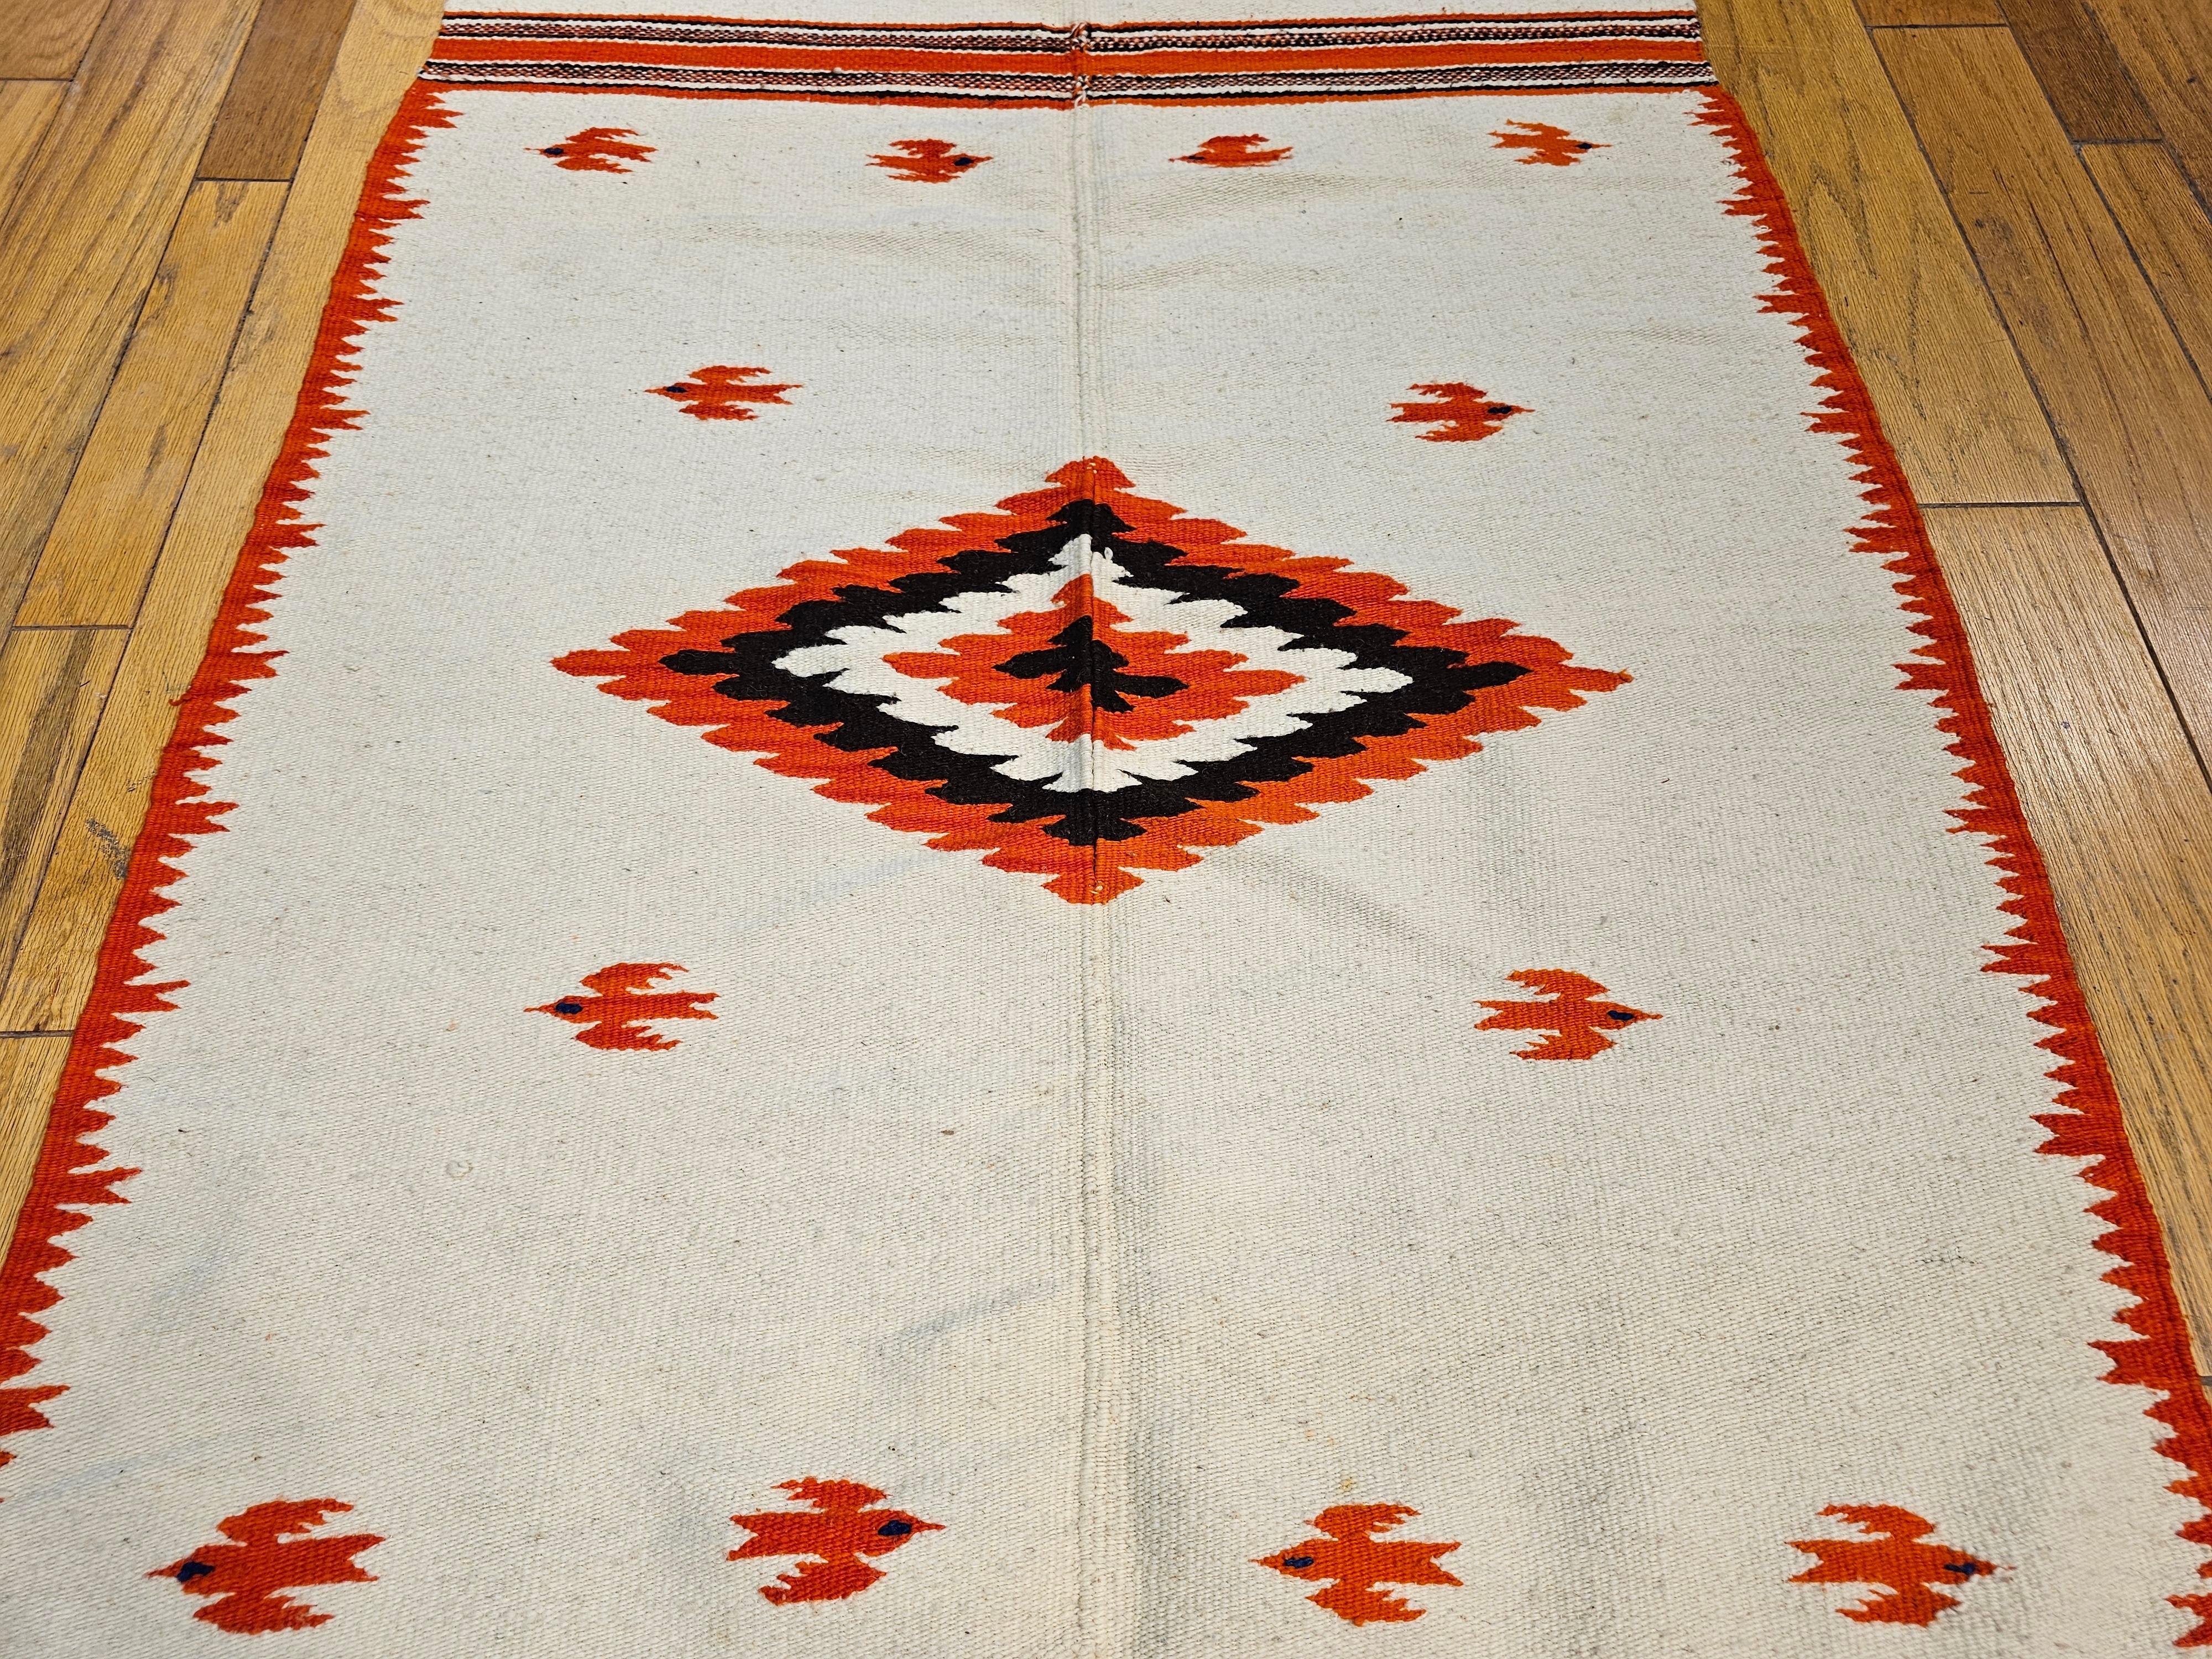 Vintage Mexican Serape Saltillo Kilim Rug with Mythical Bird Designs In Good Condition For Sale In Barrington, IL